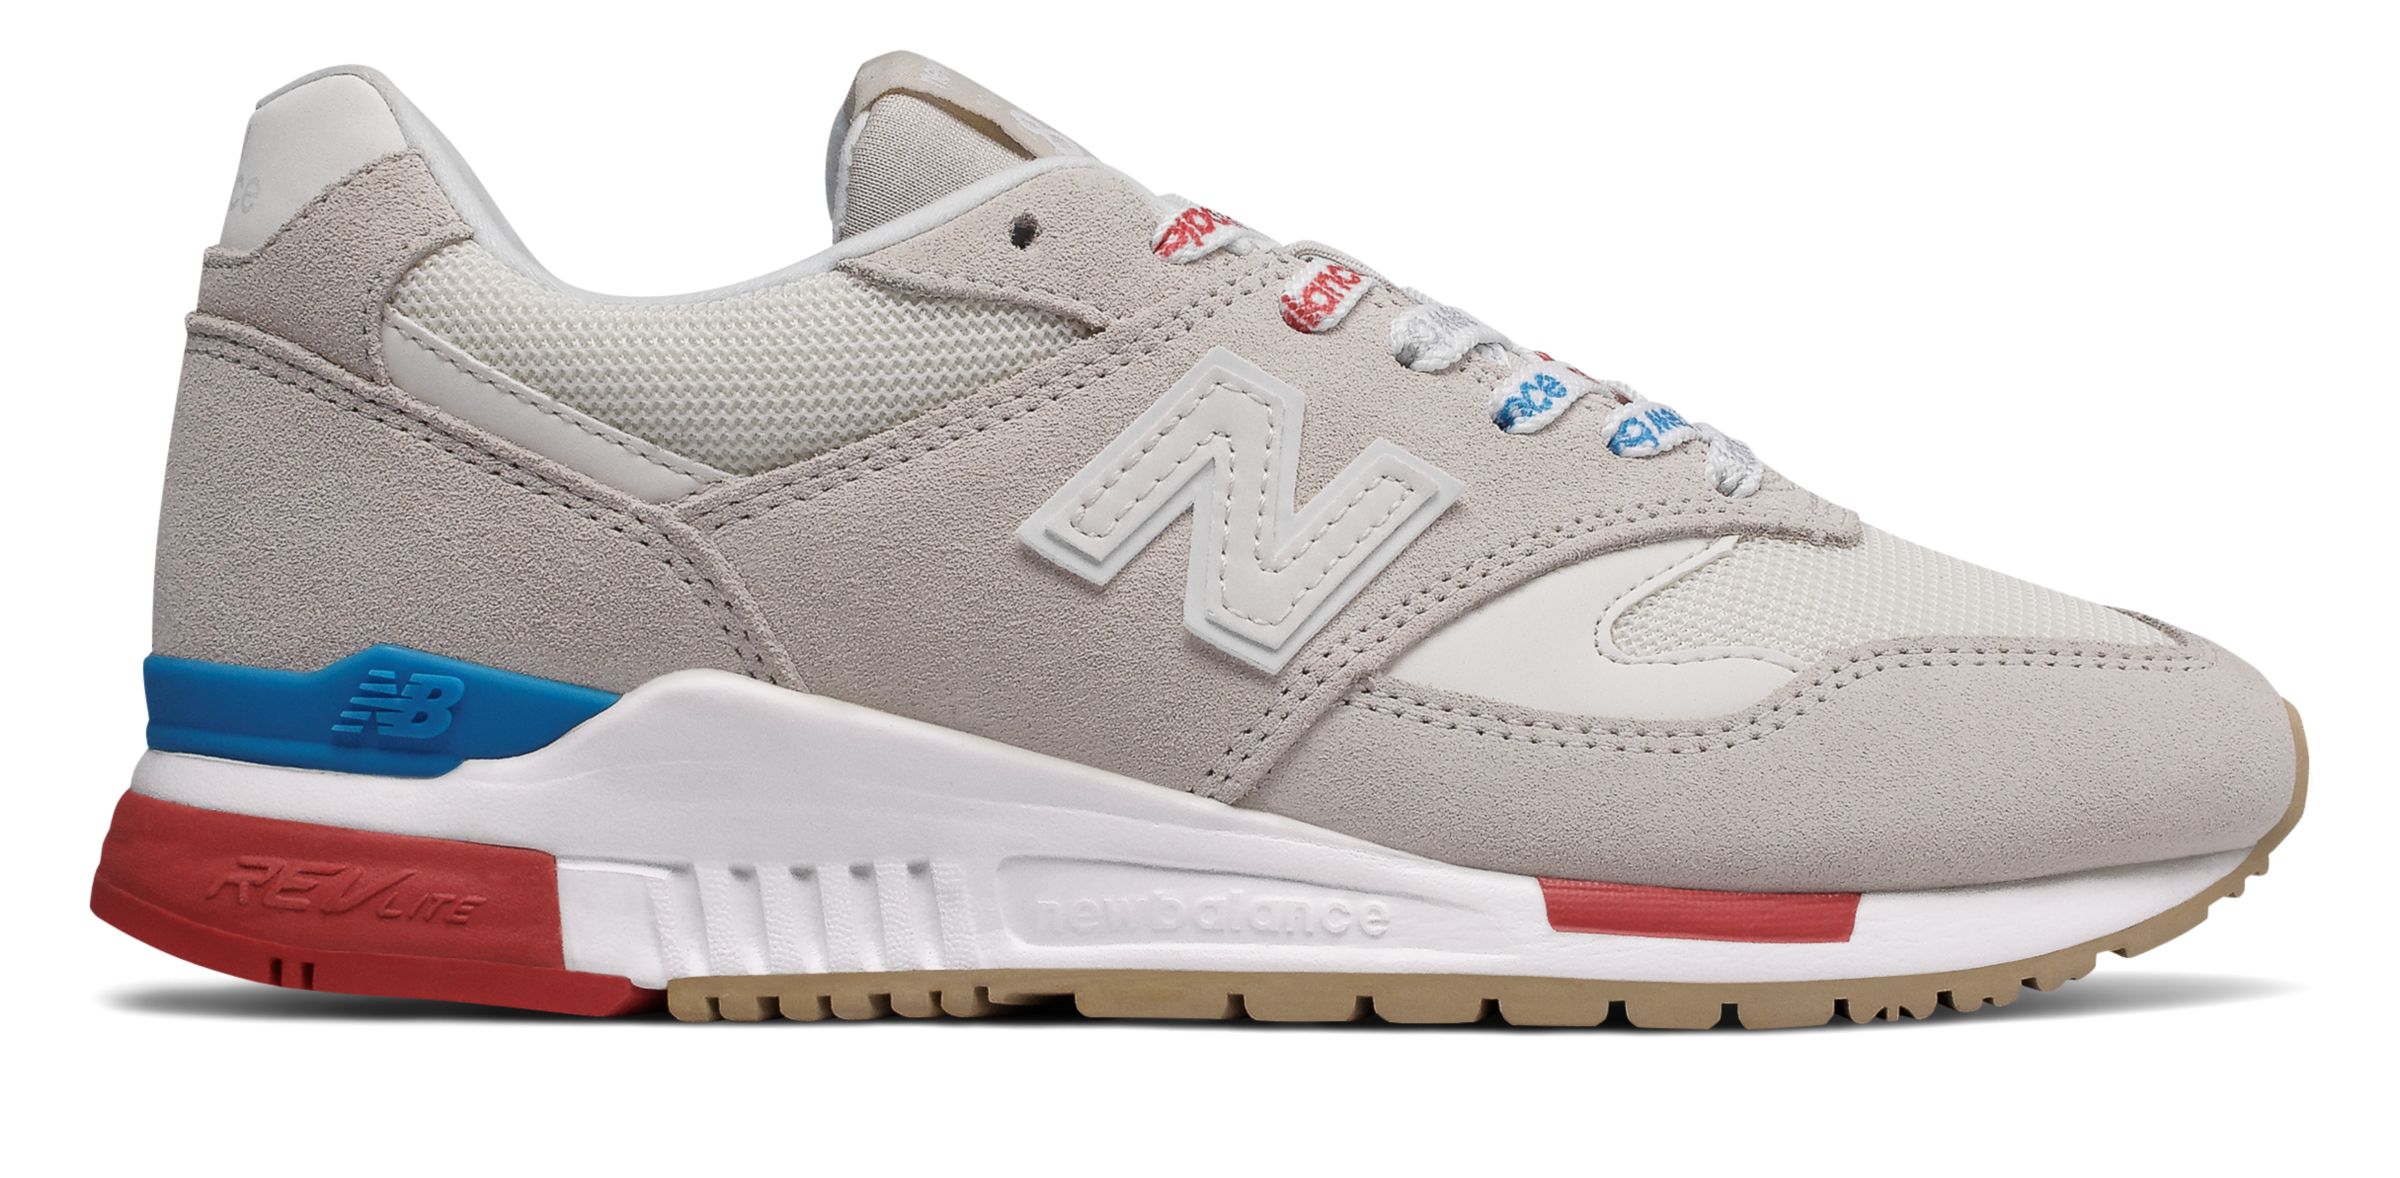 New Balance WL840-R on Sale - Discounts Up to 20% Off on WL840RTS at Joe's  New Balance Outlet